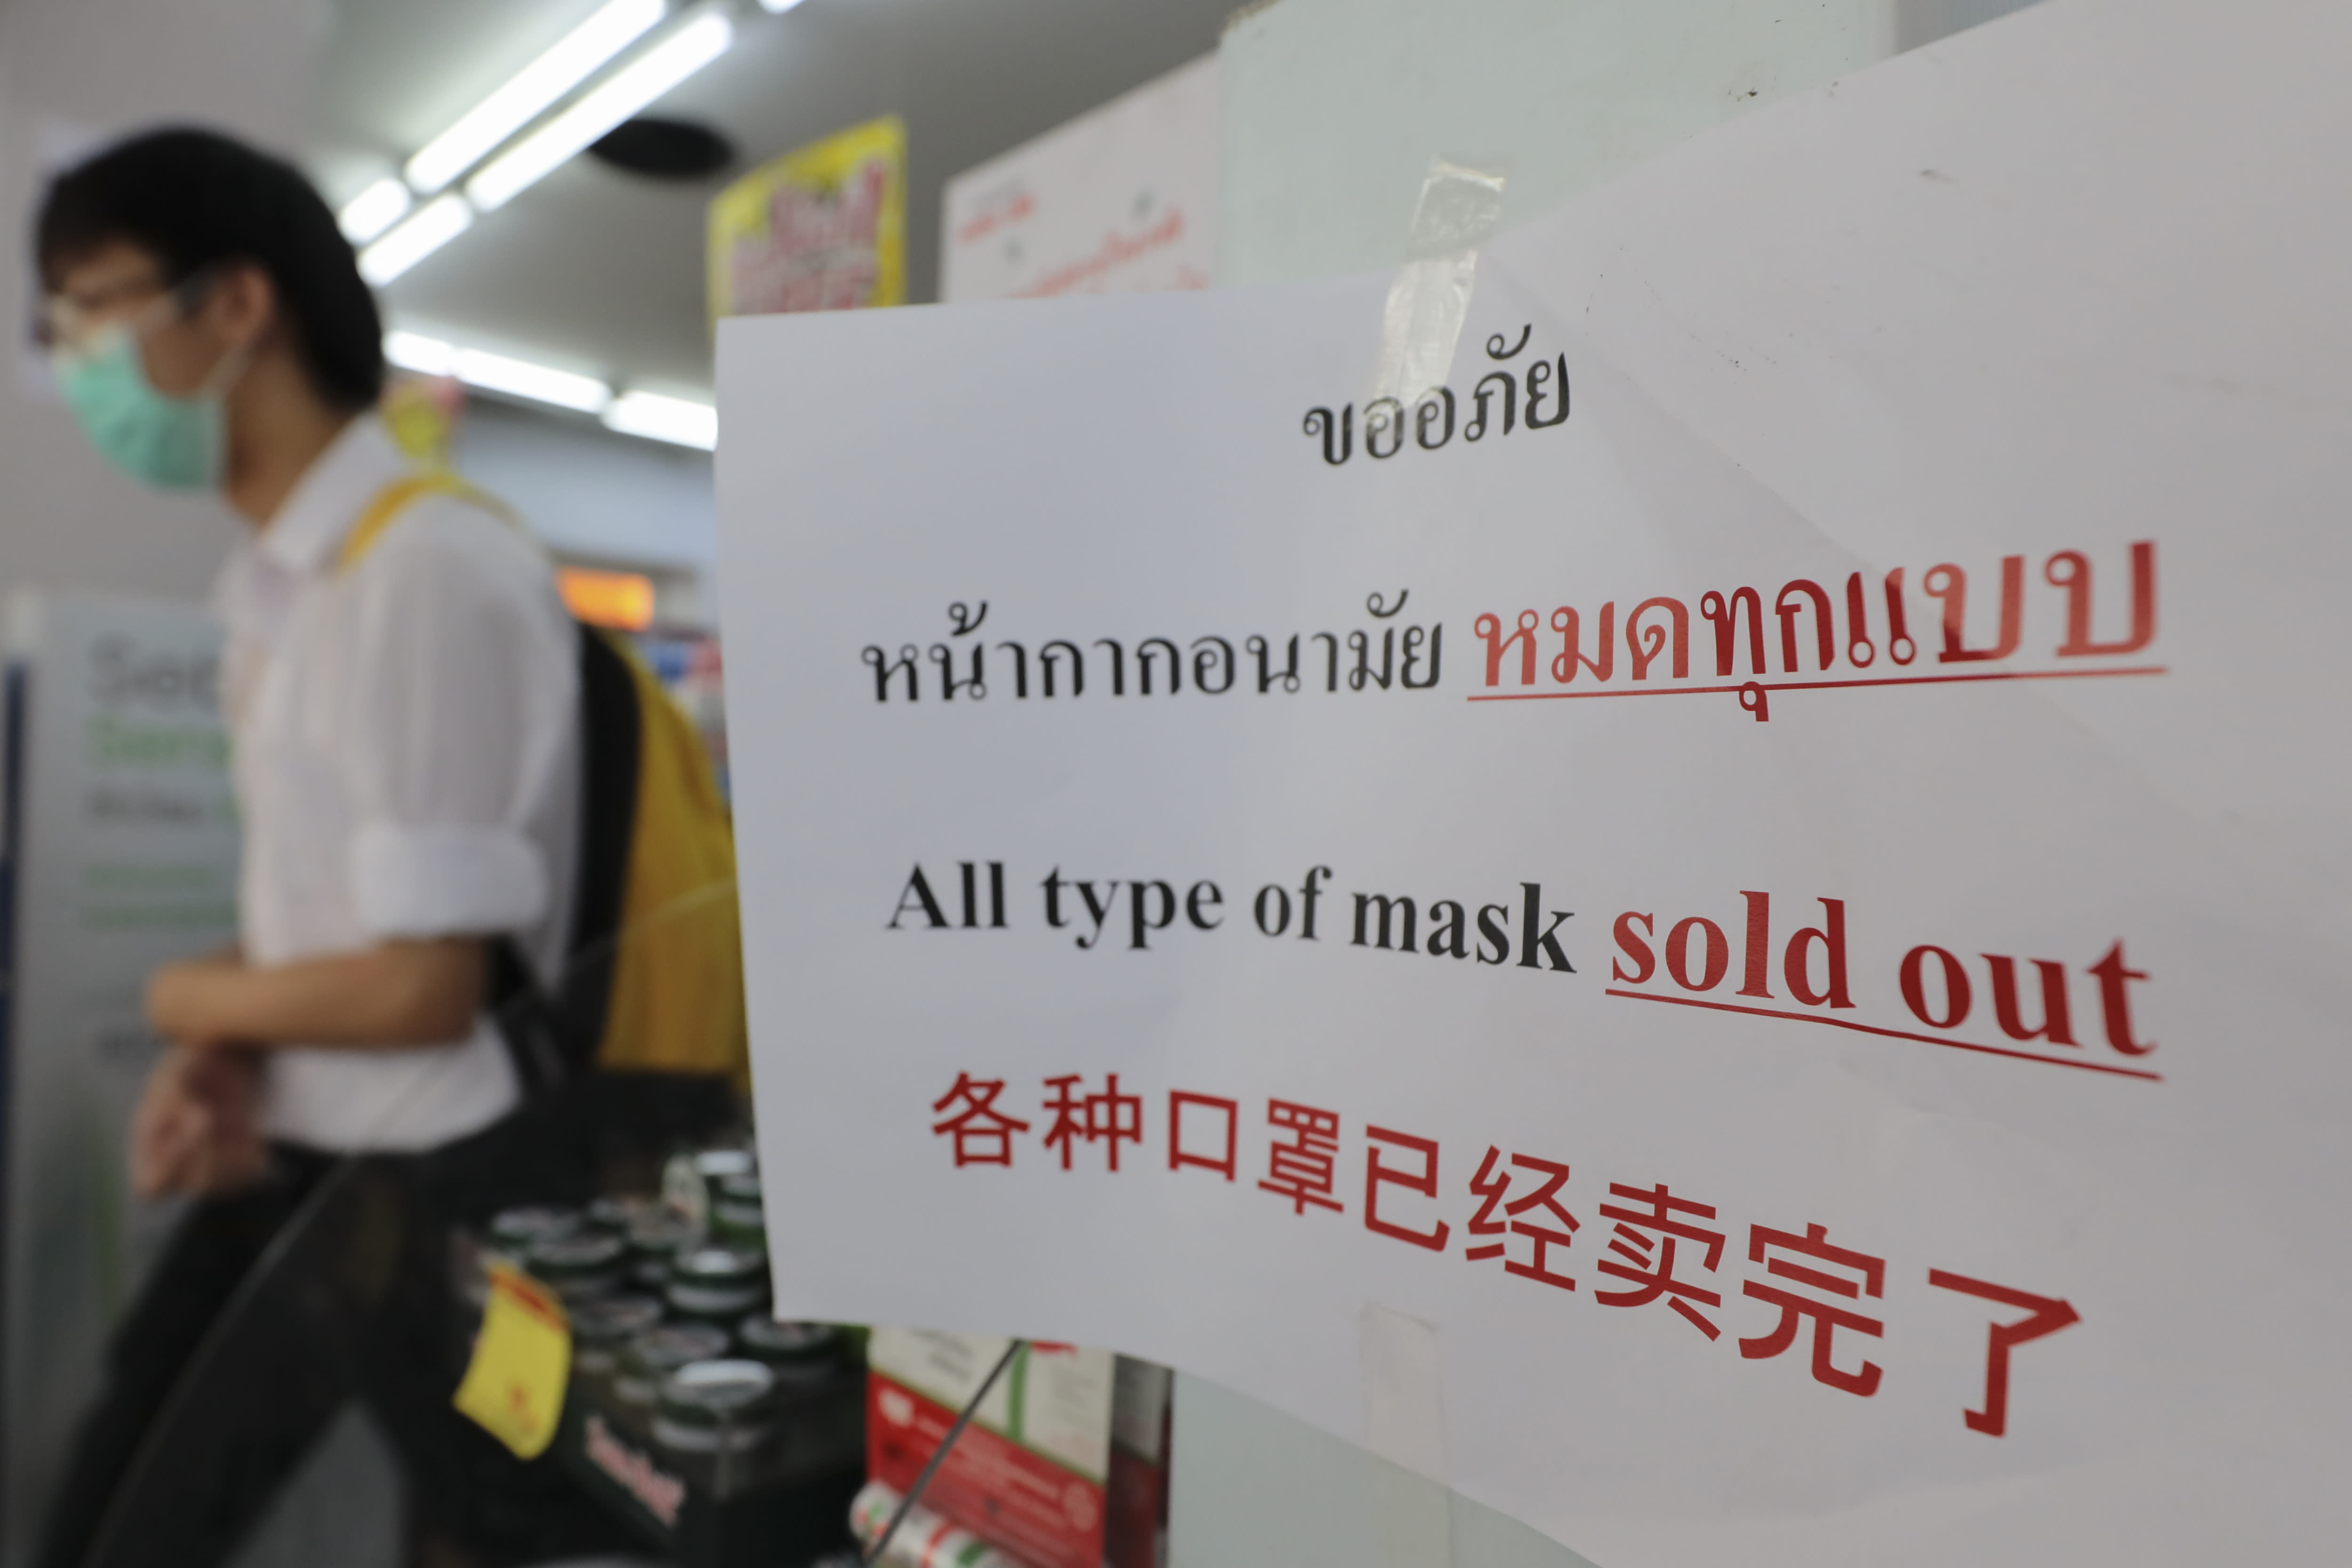 Panic buying of face masks is unwarranted and could pose risks for health care workers, experts say - CNBC